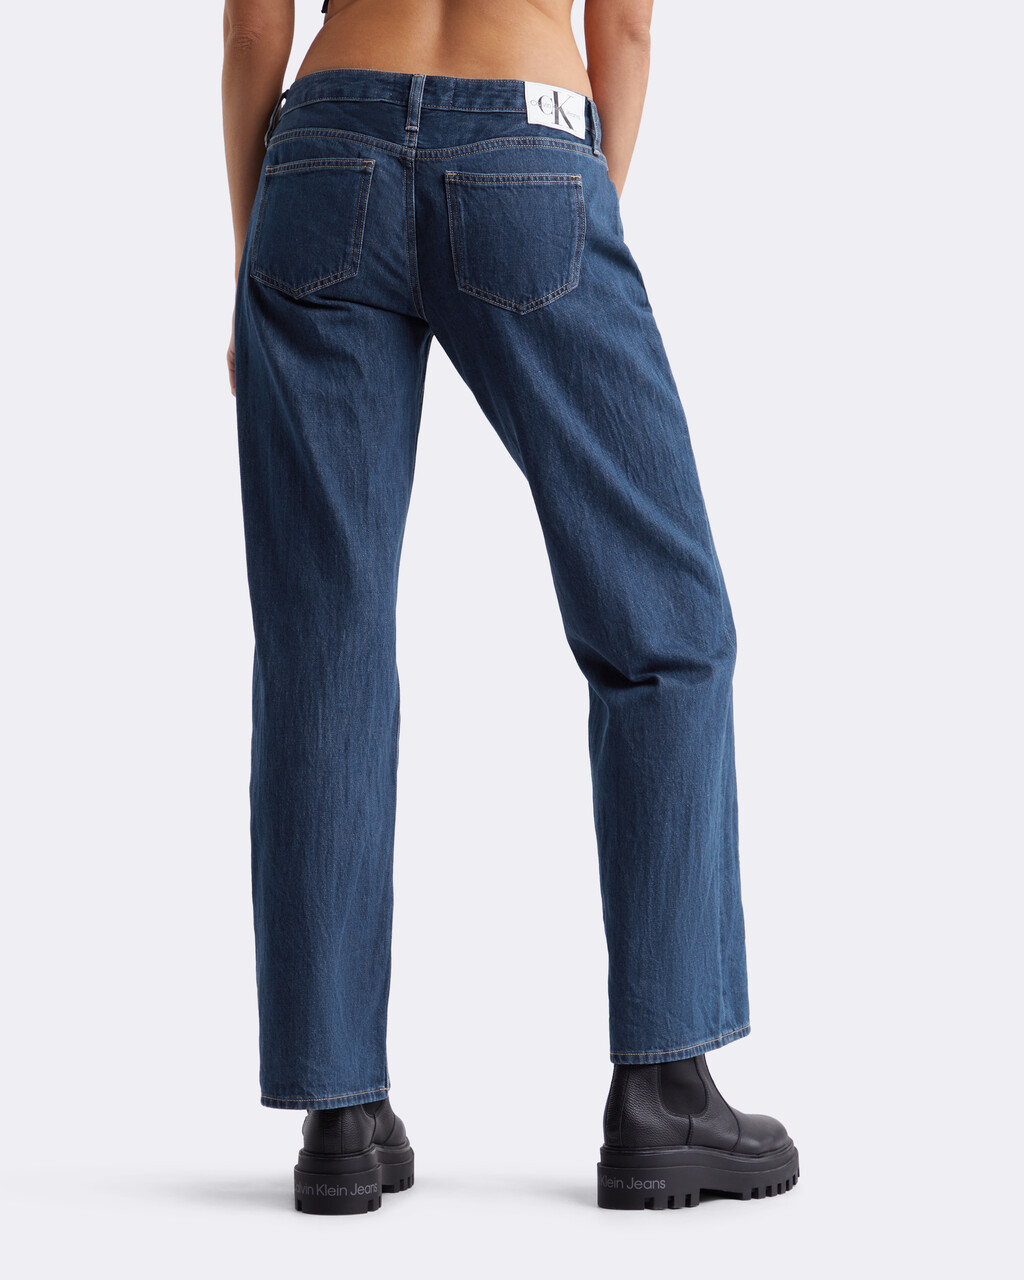 Extreme Low Rise Baggy Jeans, 014A INKY BLUE, hi-res